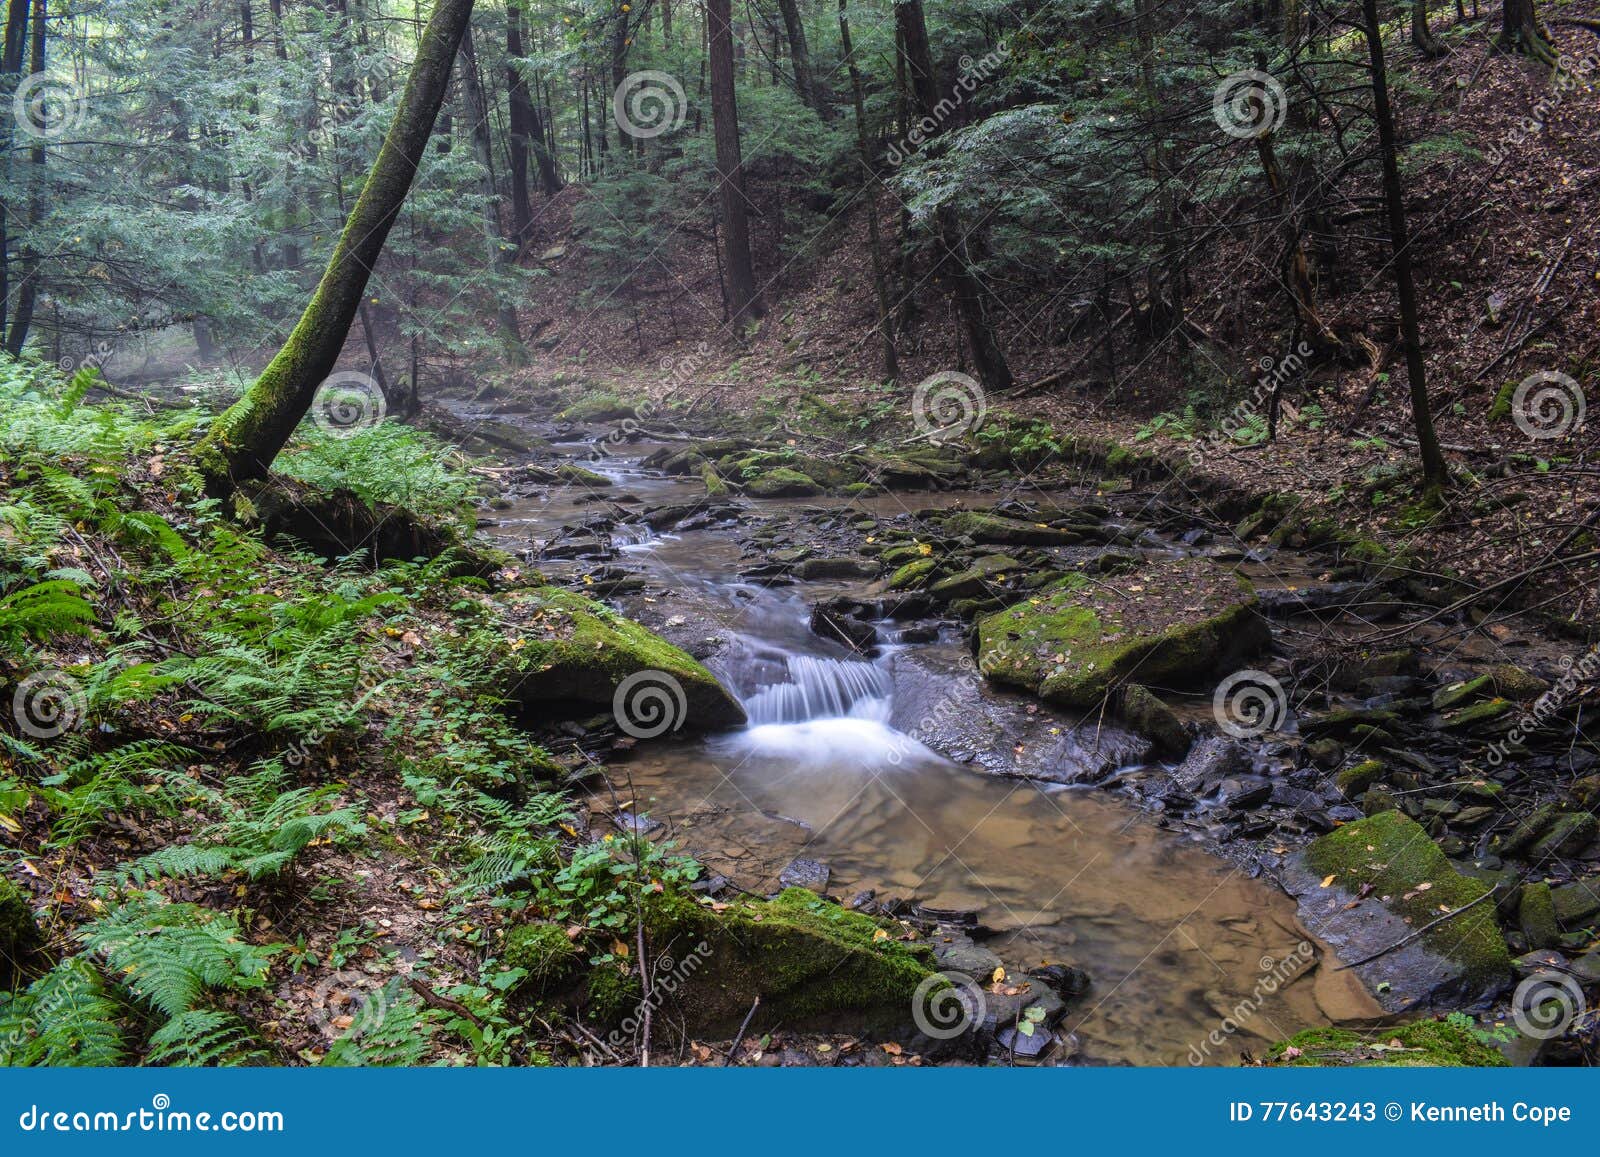 a small trout stream in the appalachian mountains.